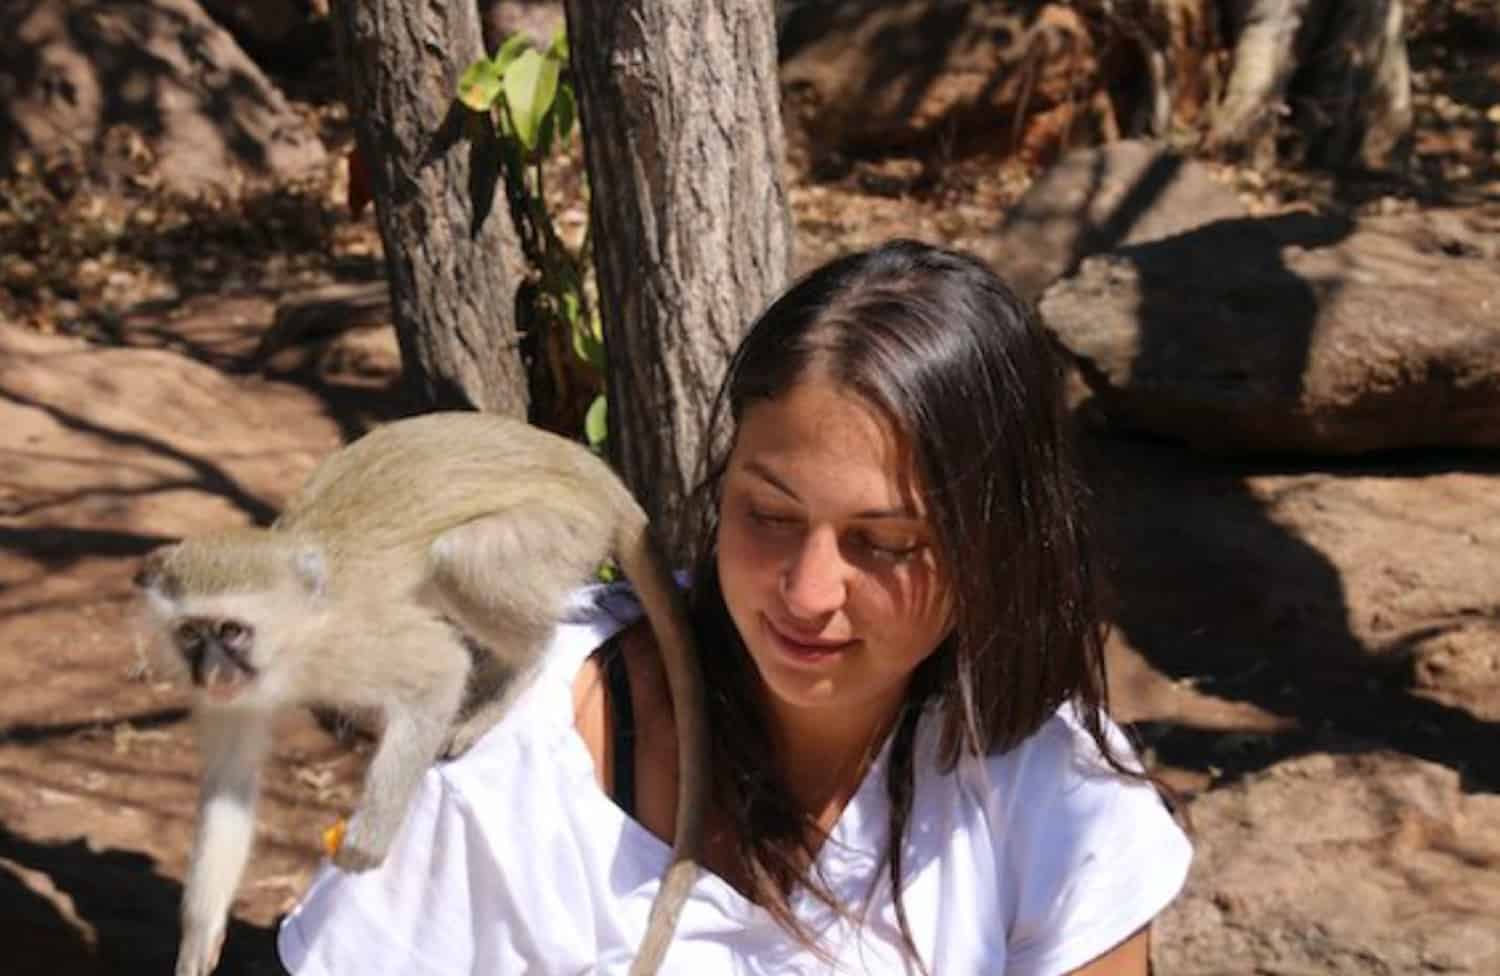 Girl with monkey on her shoulder